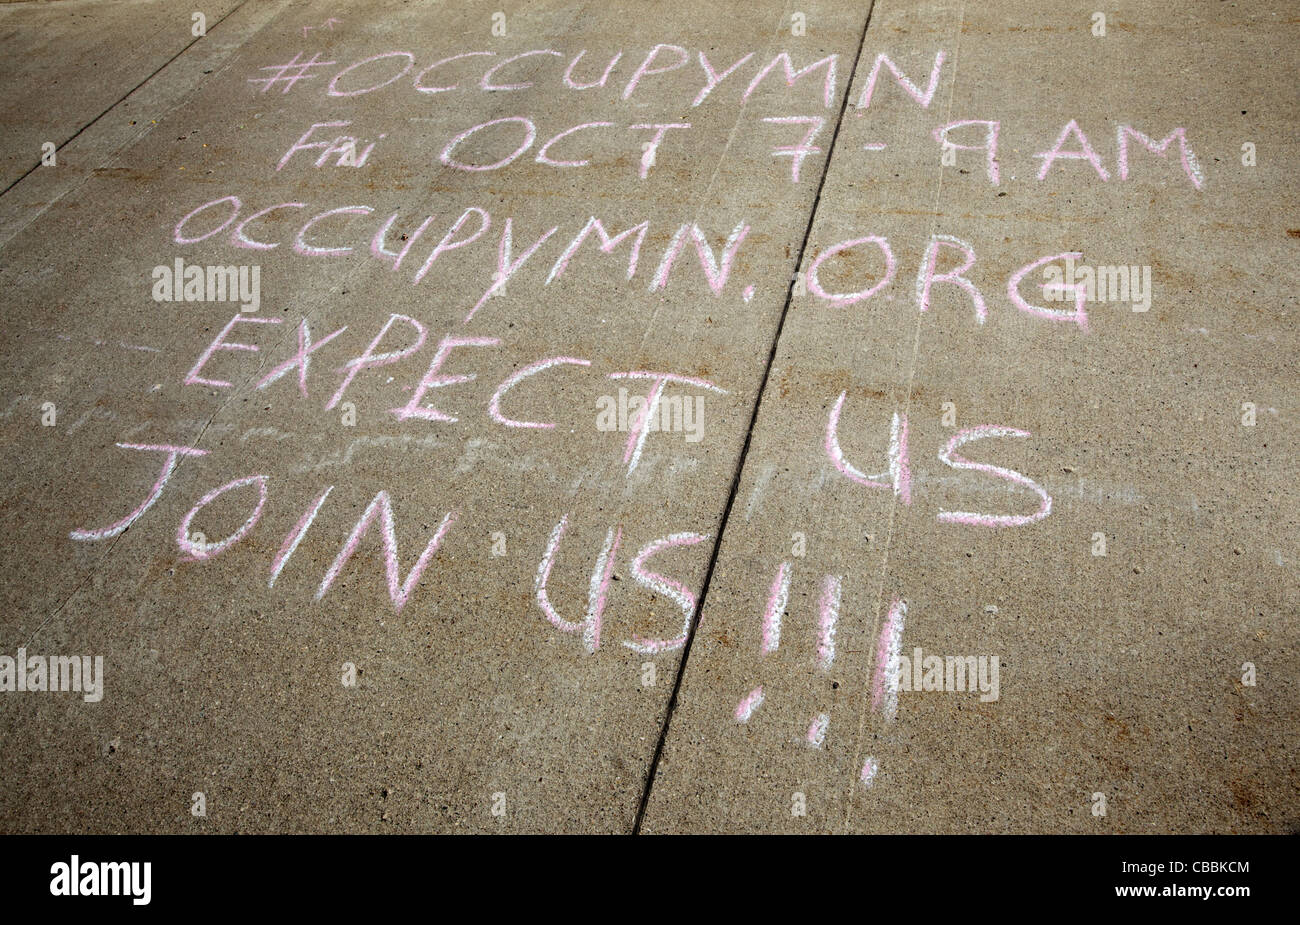 An announcement written with chalk on a cement sidewalk for OccupyMN in Minneapolis, Minnesota – October 2011 Stock Photo